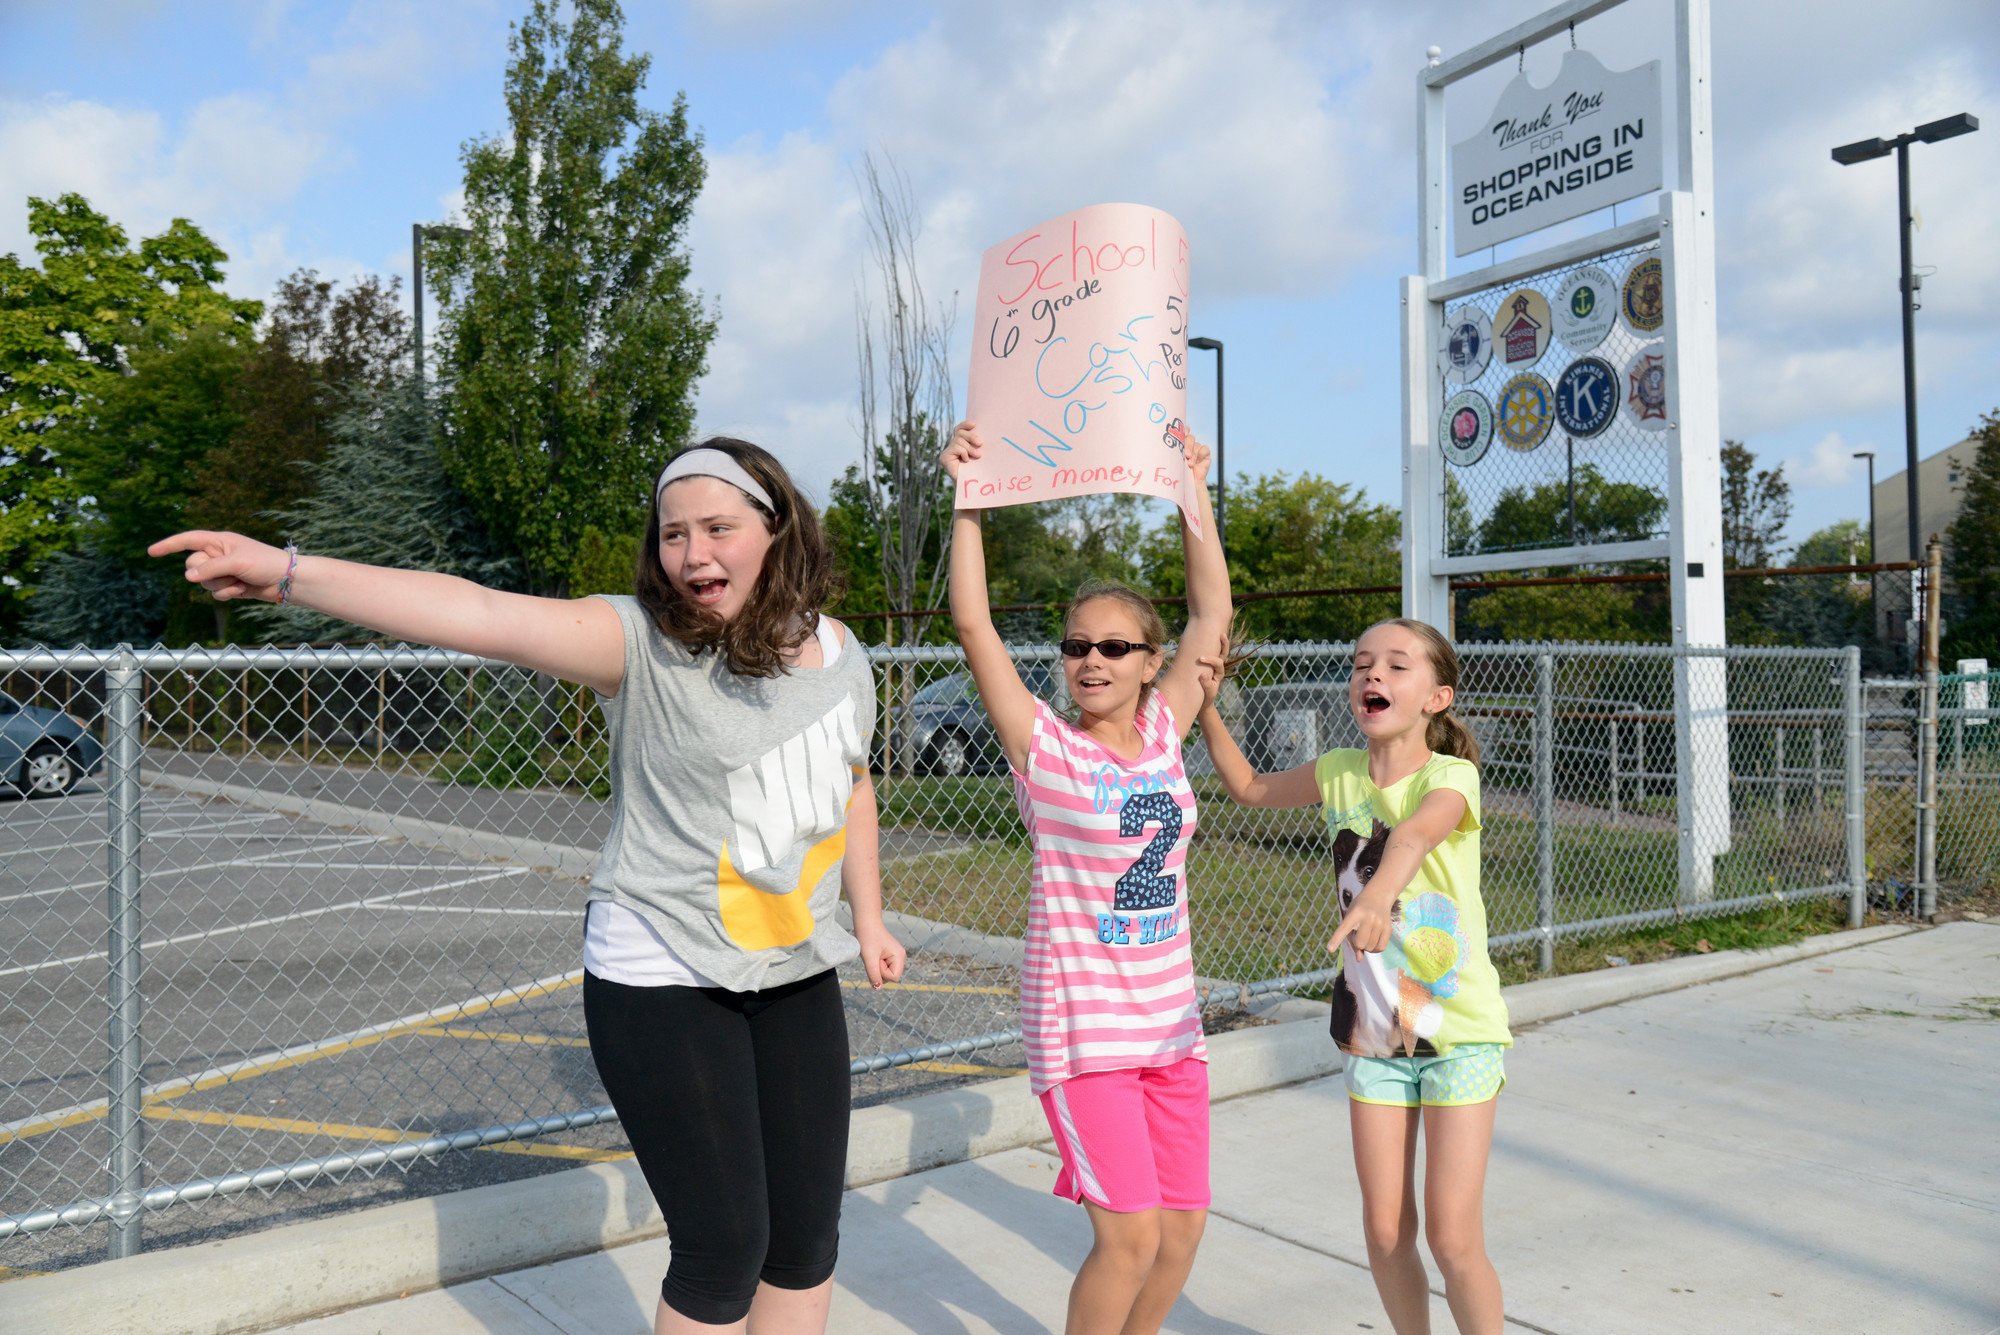 Sydney Nostramo, Miray Yildirim, and Jenna Cozier directed customers to the School No. 5 car wash on Sept. 20.